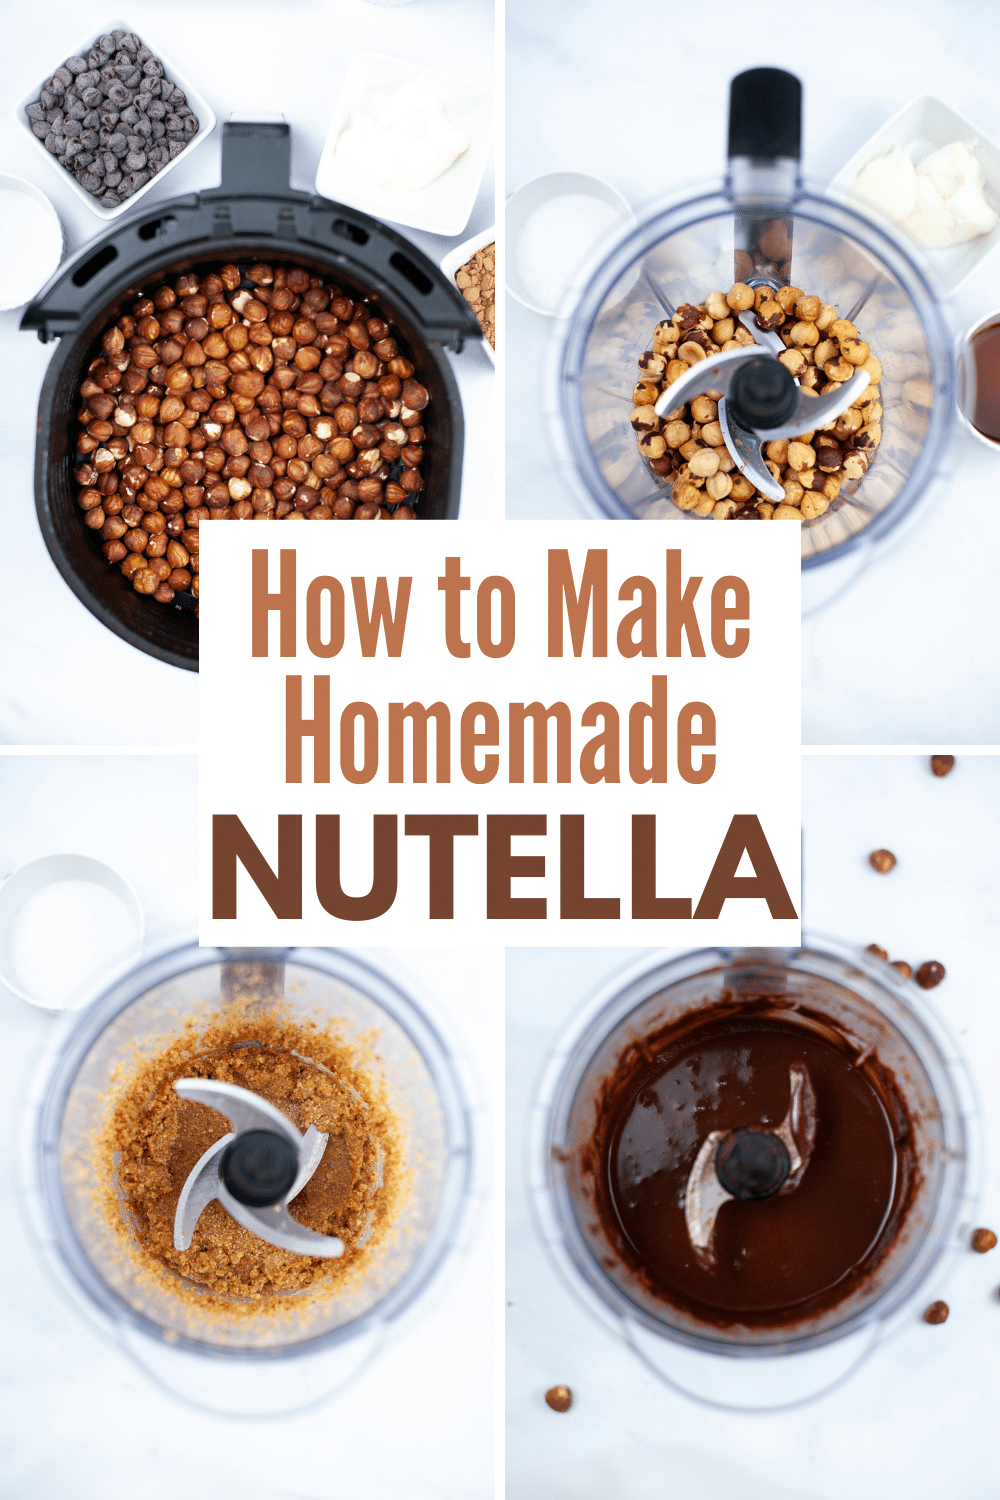 If you love Nutella, you’re going to love these directions on How To Make Homemade Nutella. It’s easy to make and tastes like the real thing! #nutella #homemadenutella #recipe via @wondermomwannab